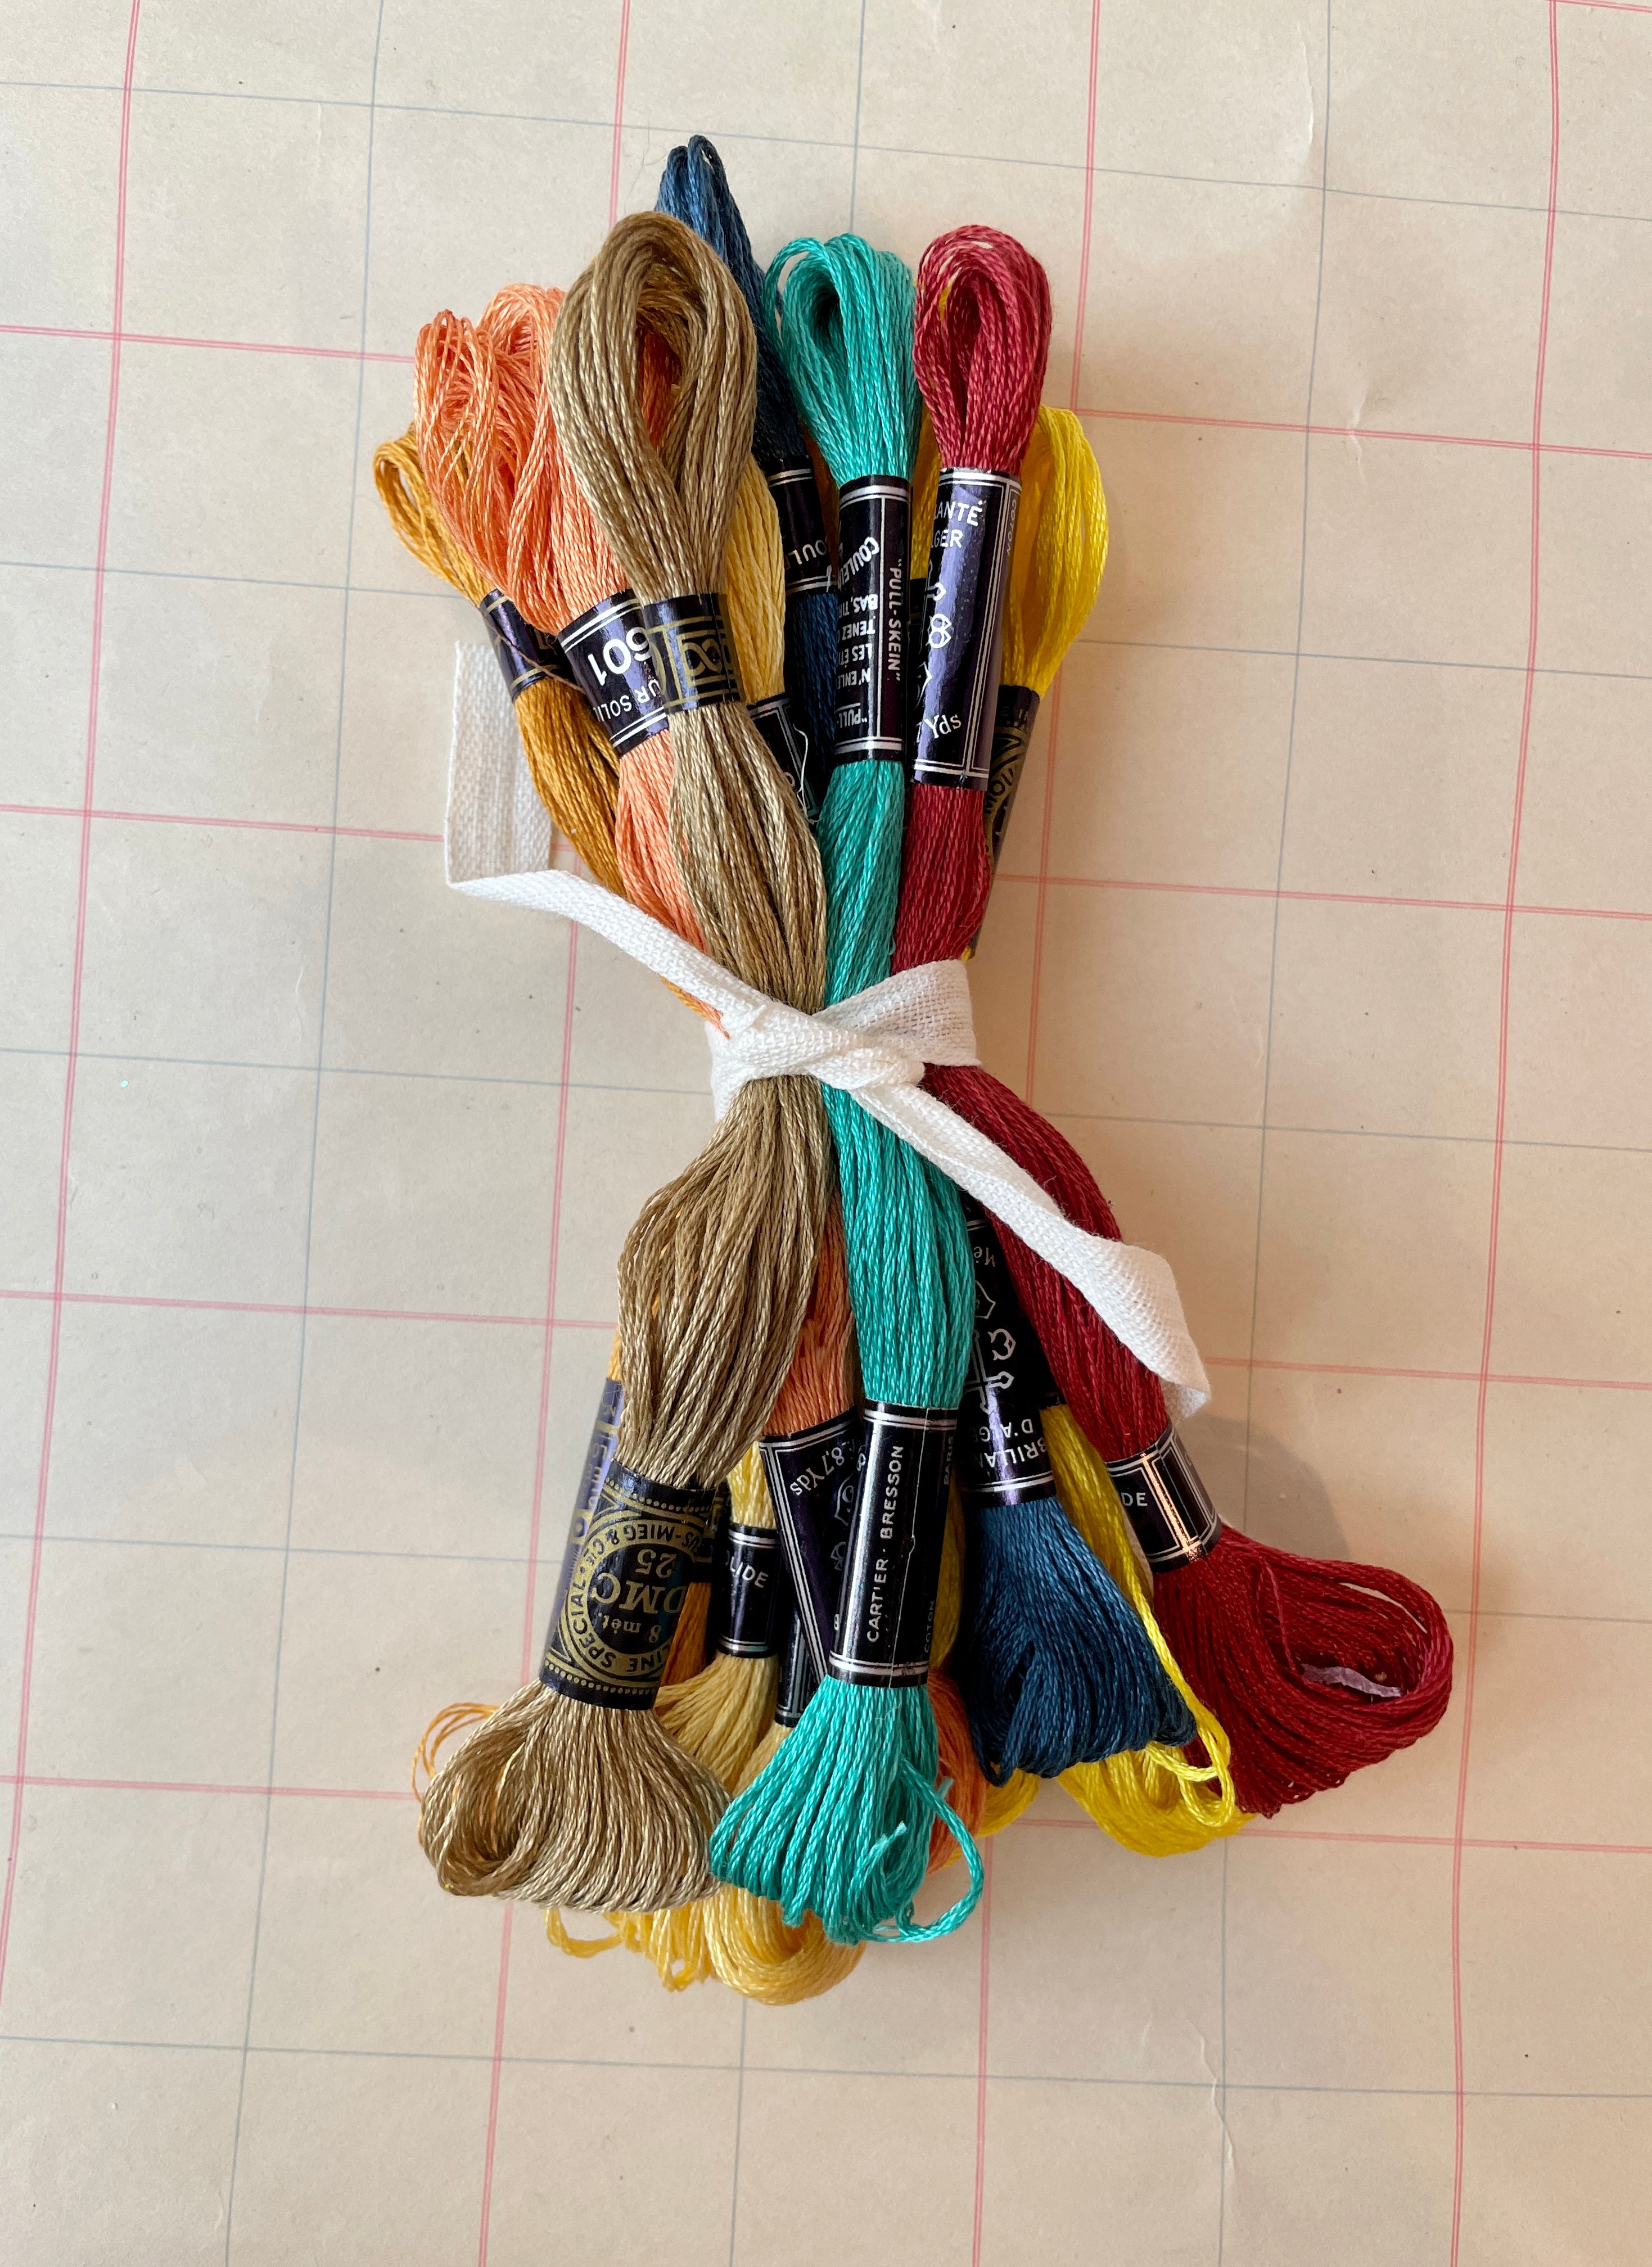 Vintage French Embroidery Floss